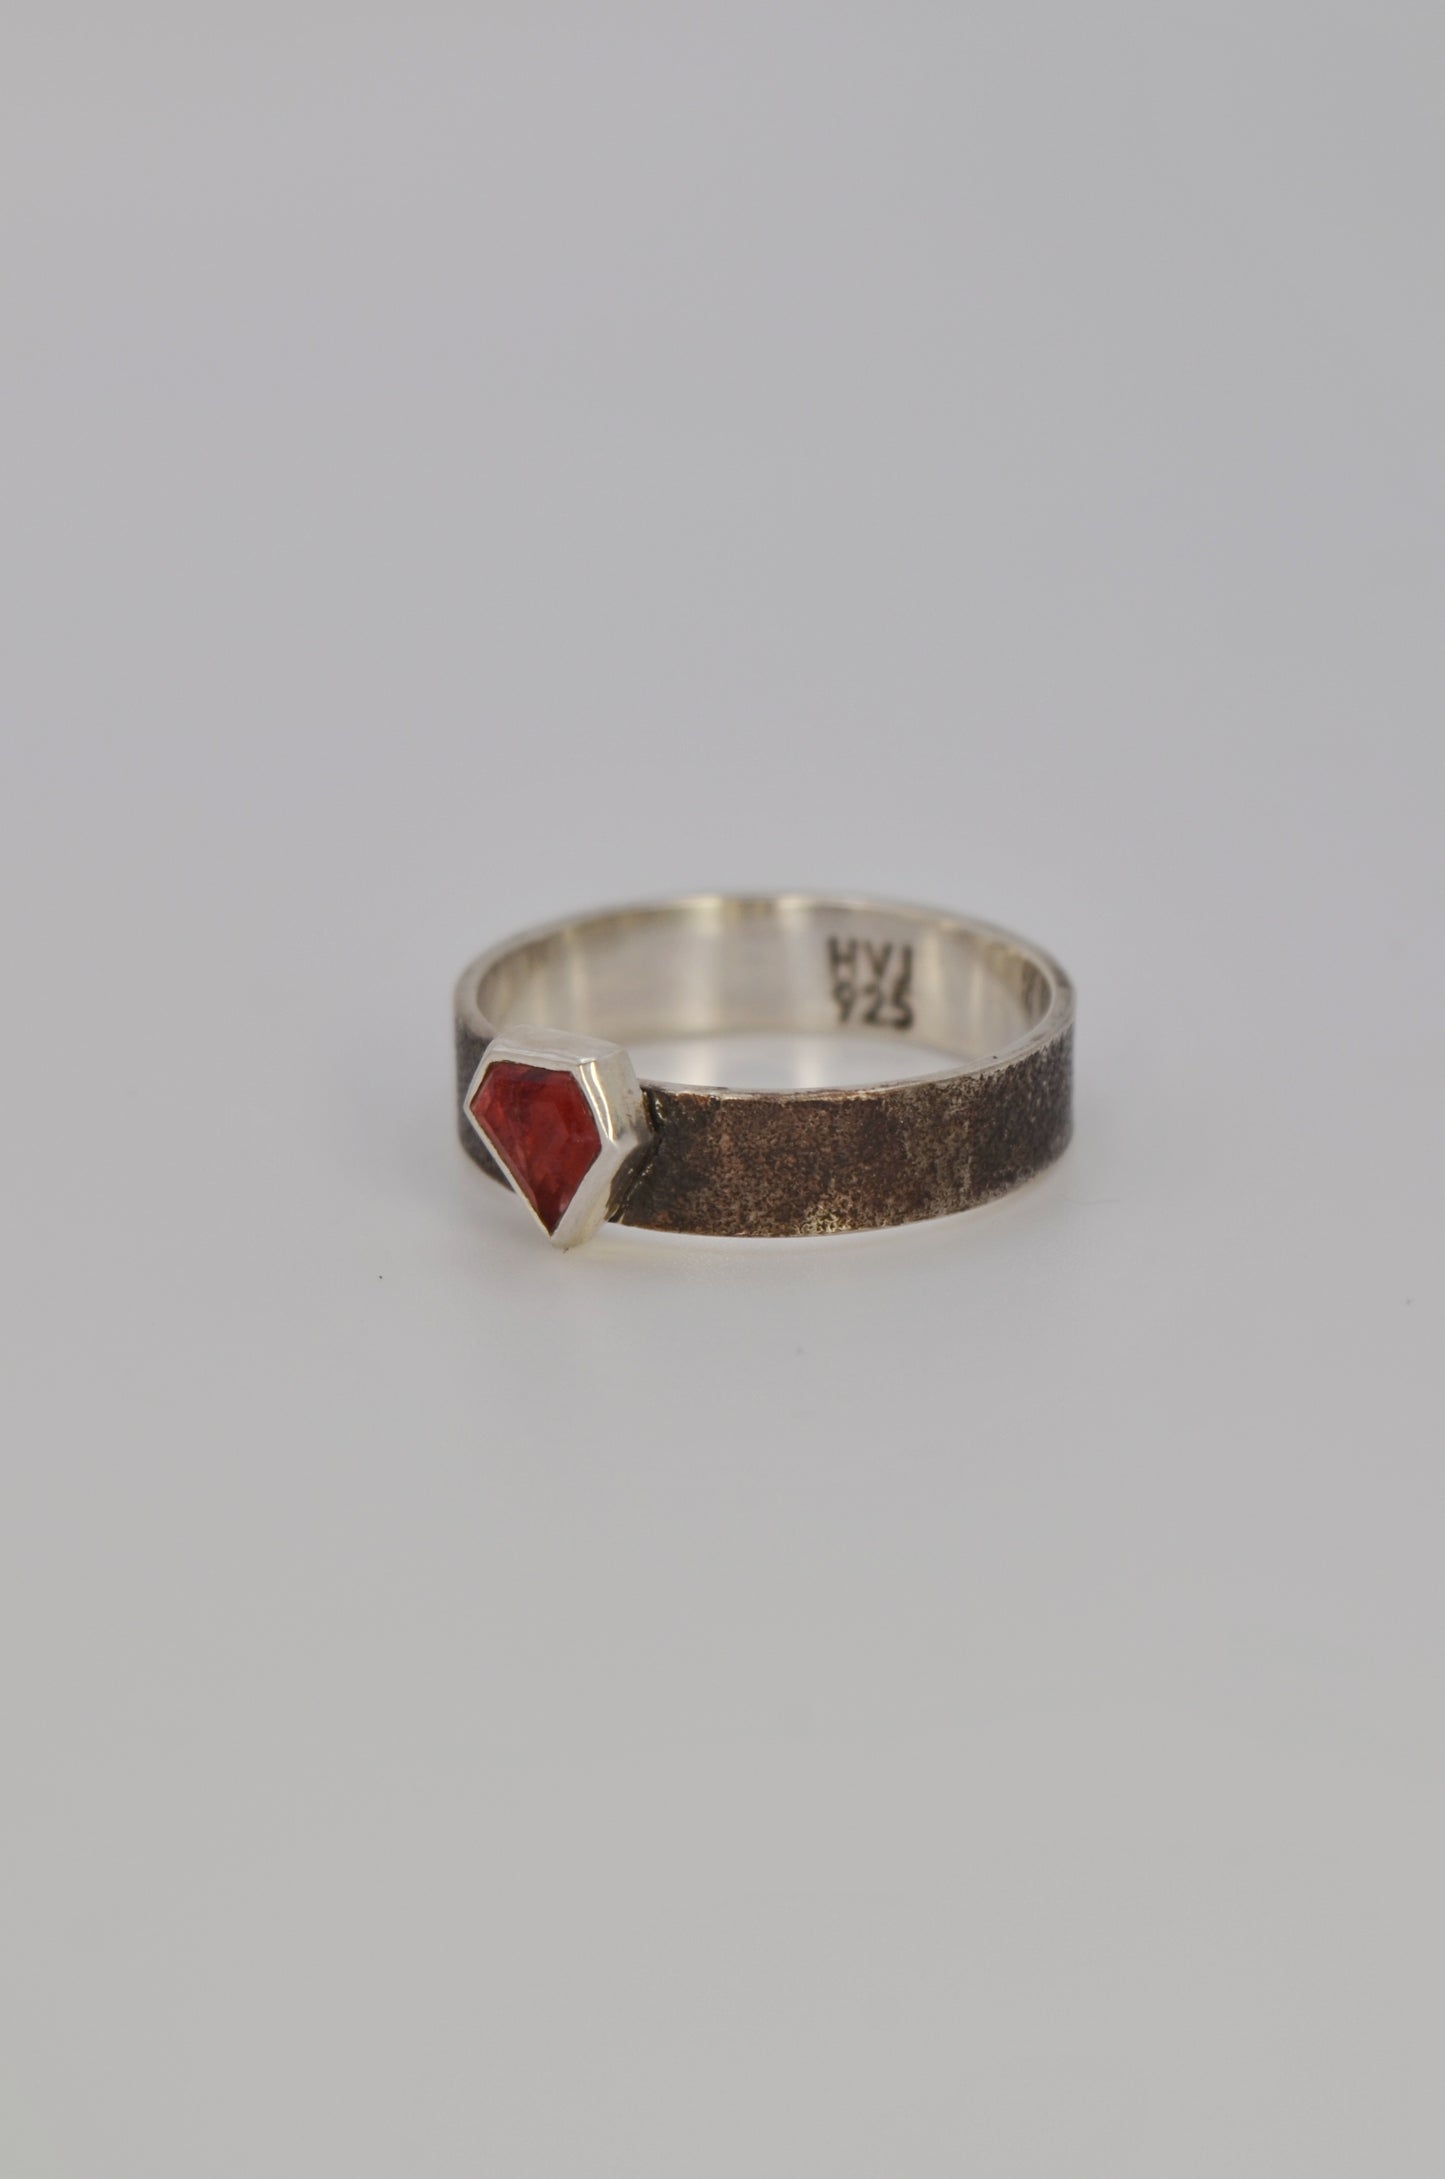 Red Spinel Natural Gemstone Sterling Silver Ring, Antique, Minimalist, Black Textured Band, Size 9.5 U.S.